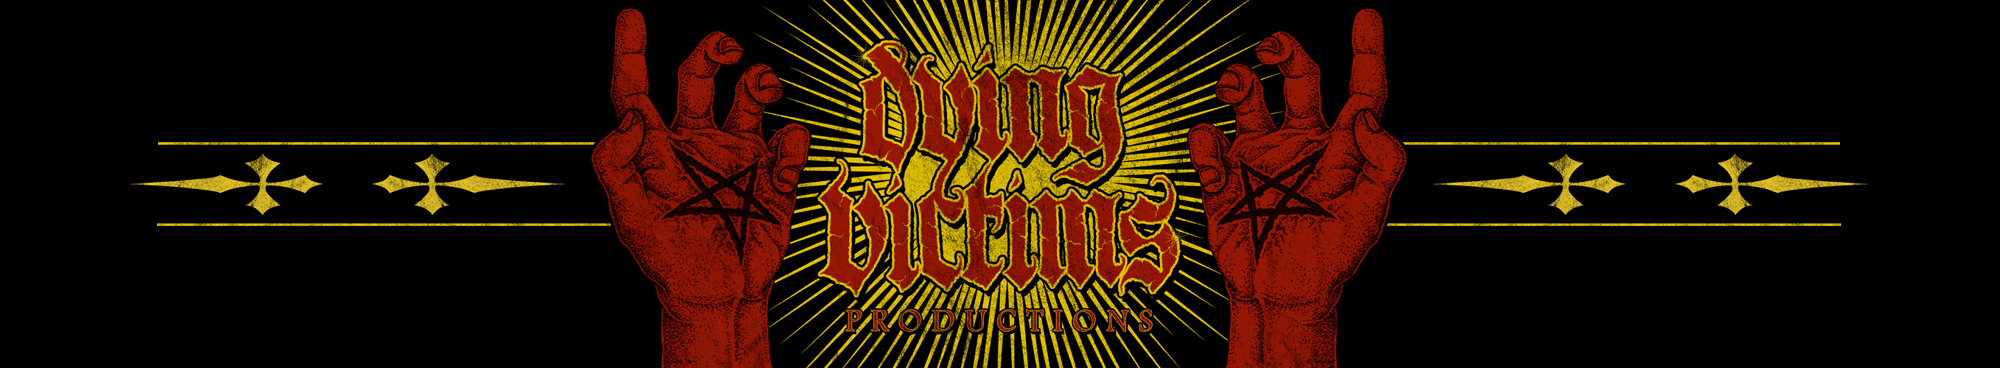 Dying Victims Productions